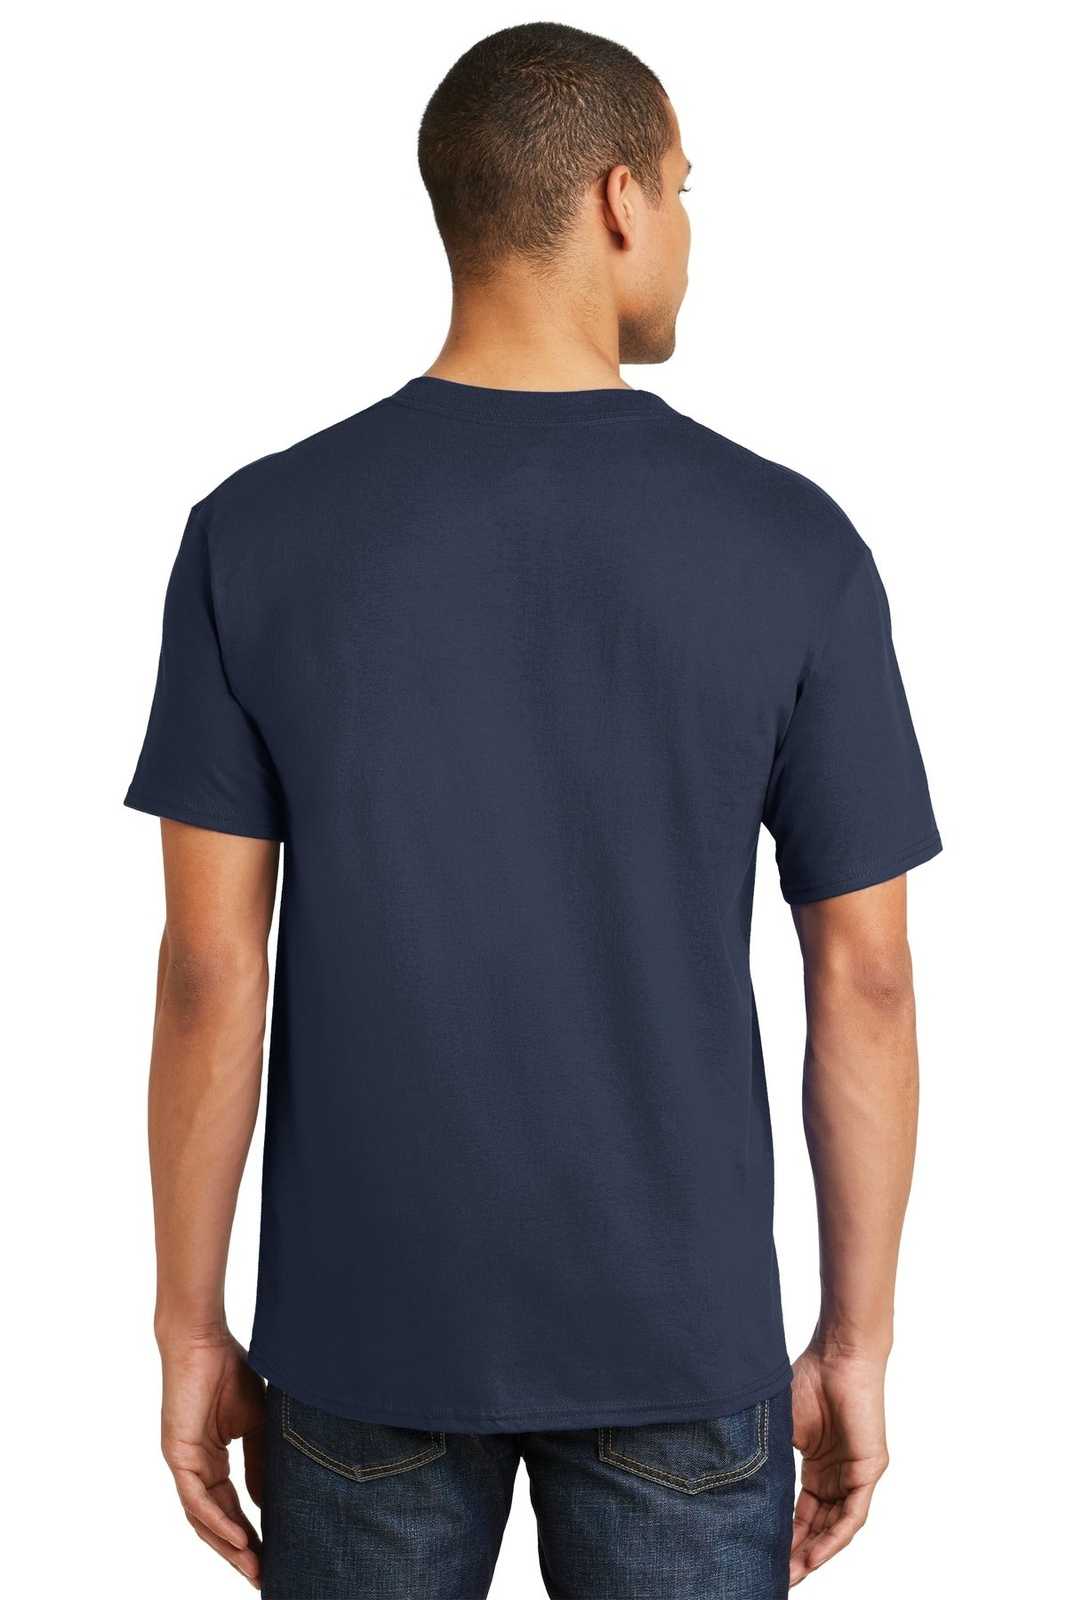 Hanes 5180 Beefy-T 100% Cotton T-Shirt - Navy - HIT a Double